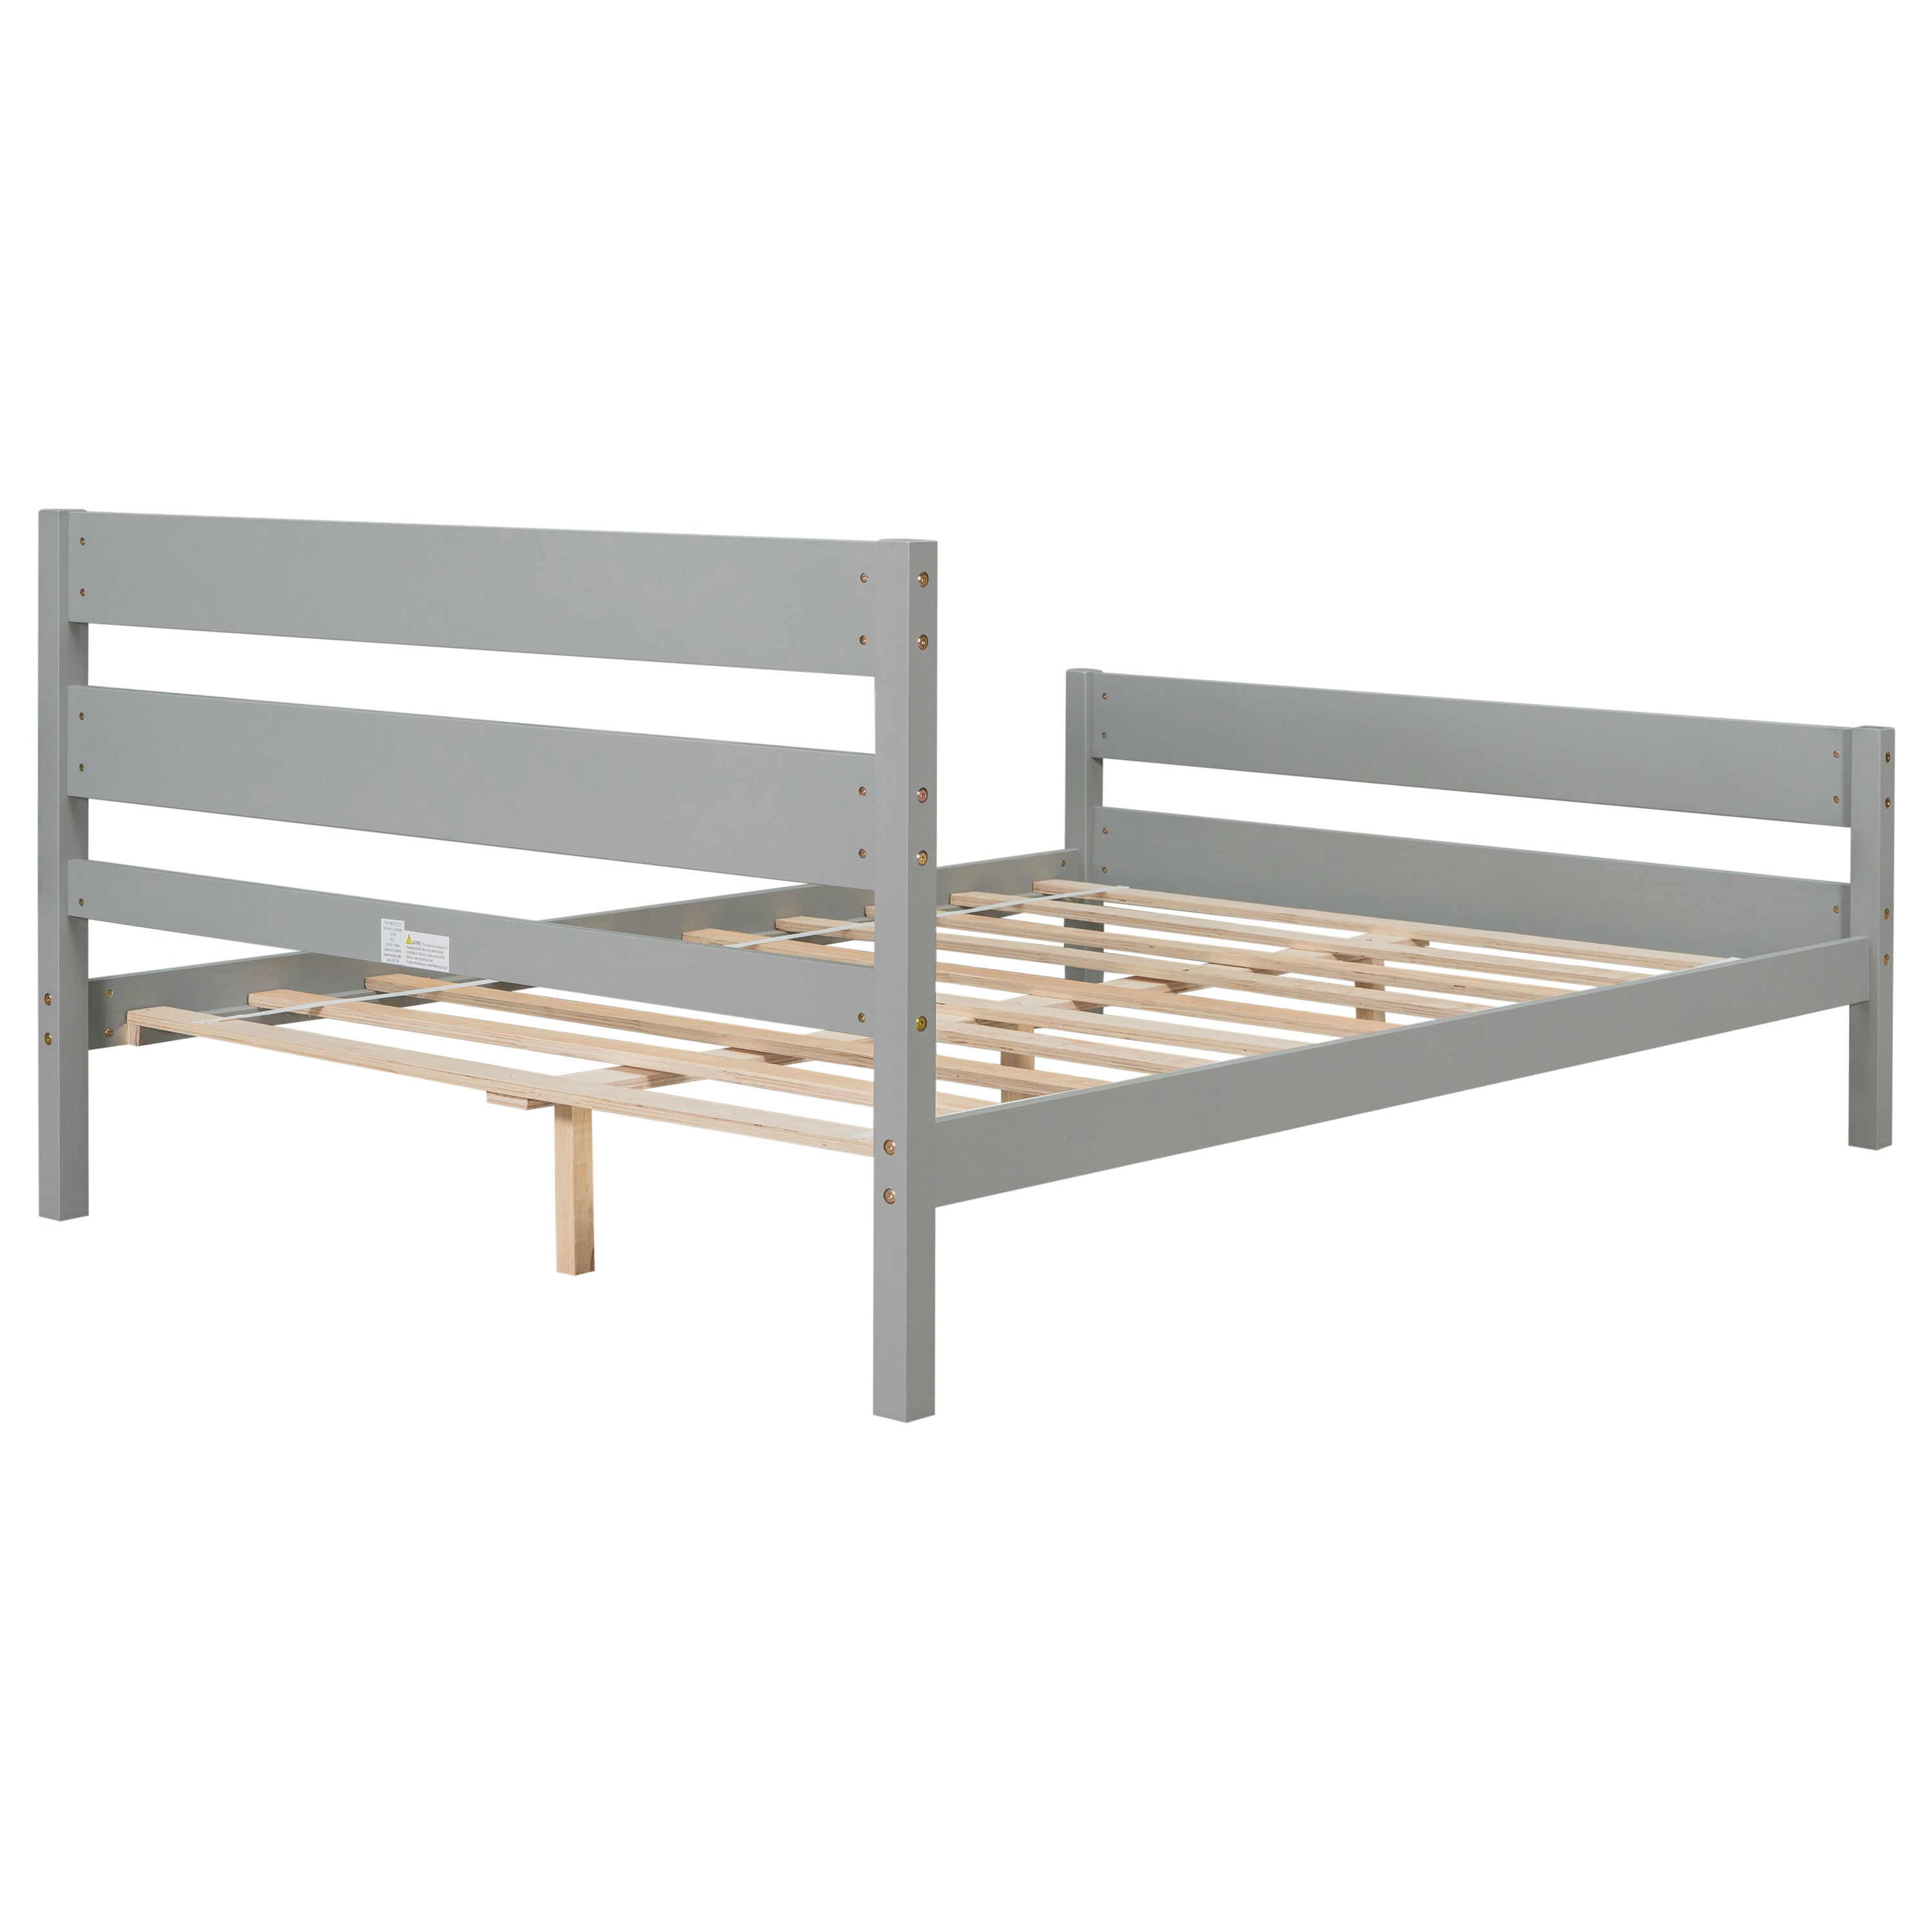 BTMWAY Full Bed Frame with Headboard and Footboard, Modern Wood Platform Bed for Kids Teens Adults, Strong Wooden Slats Support, Full Size Bed Frame No Box Spring Needed, Gray